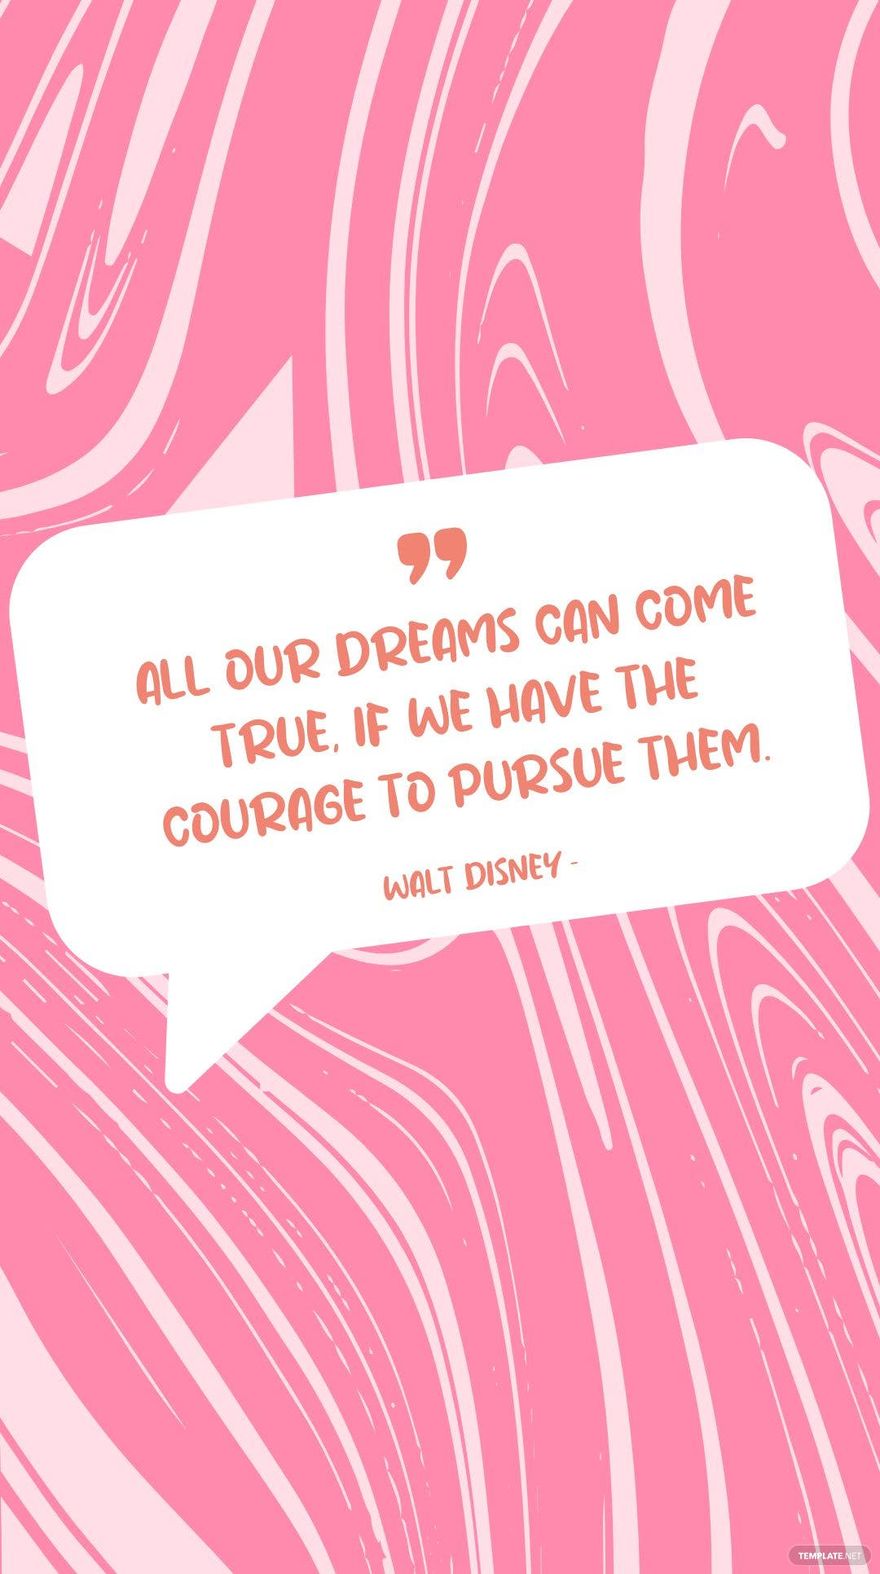 Walt Disney - All our dreams can come true, if we have the courage to pursue them. Template